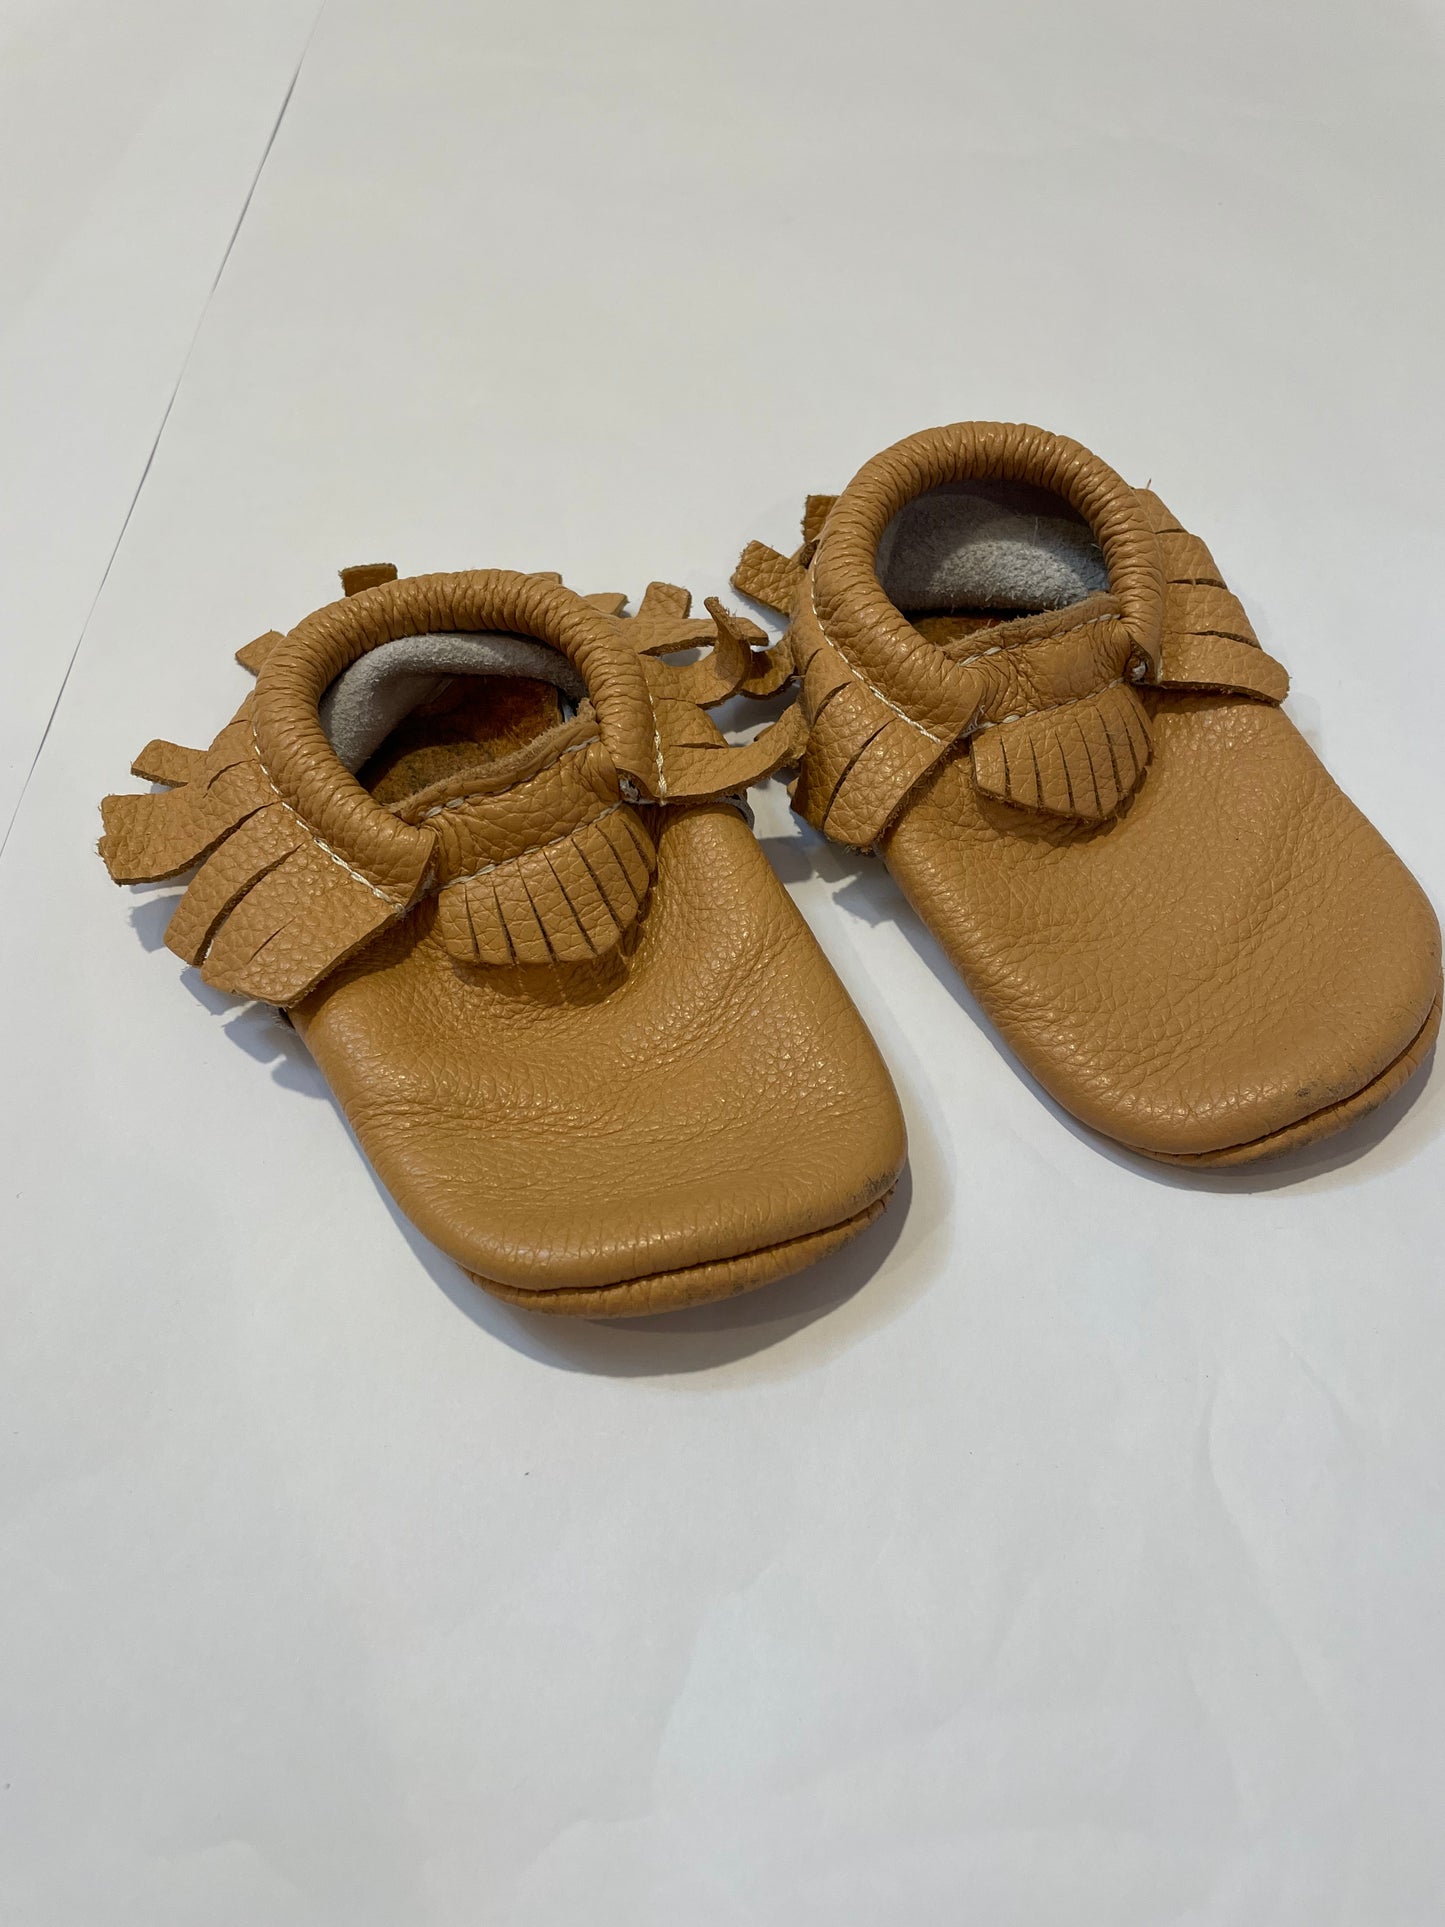 Freshly Picked Size 6 (Size 8.5 T) Mocs with Black/White Stripes GUC